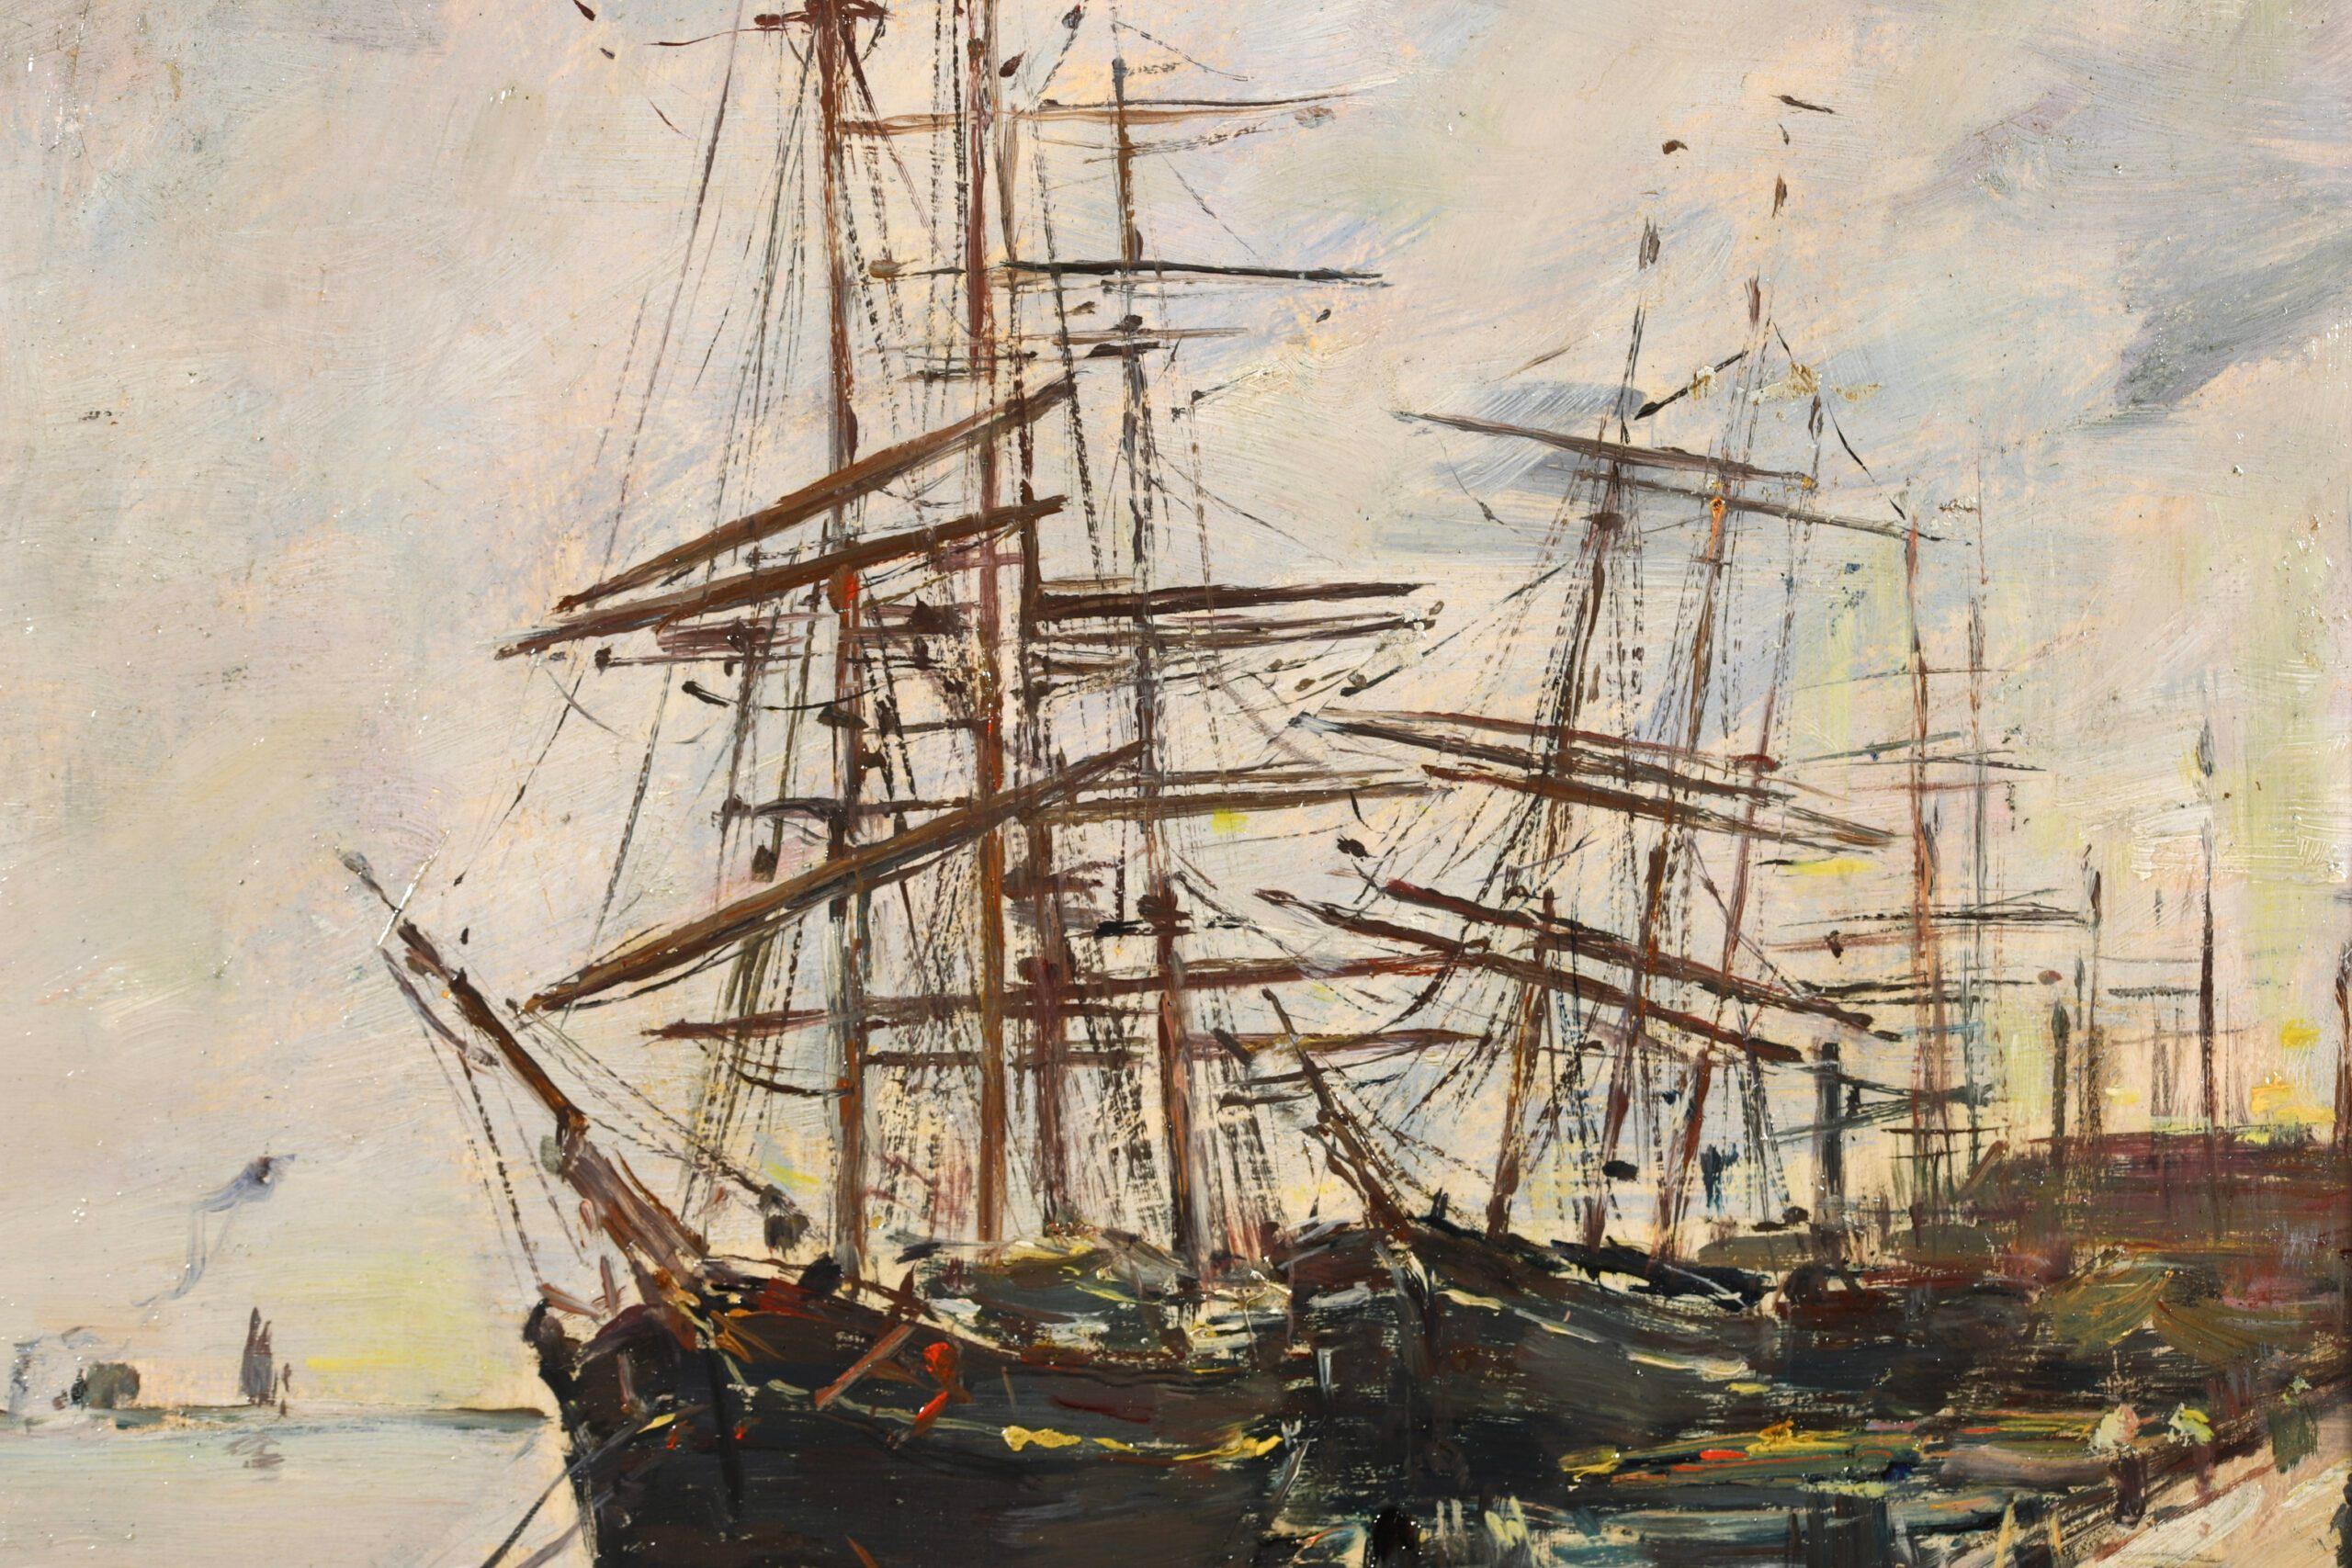 Signed, titled and dated oil on panel landscape by French impressionist painter Eugene Boudin. The work depicts sailing boats anchored at a port in Venice, Italy. The tall masts of the ships are set against the blue of the sky.

Signature:
Signed,